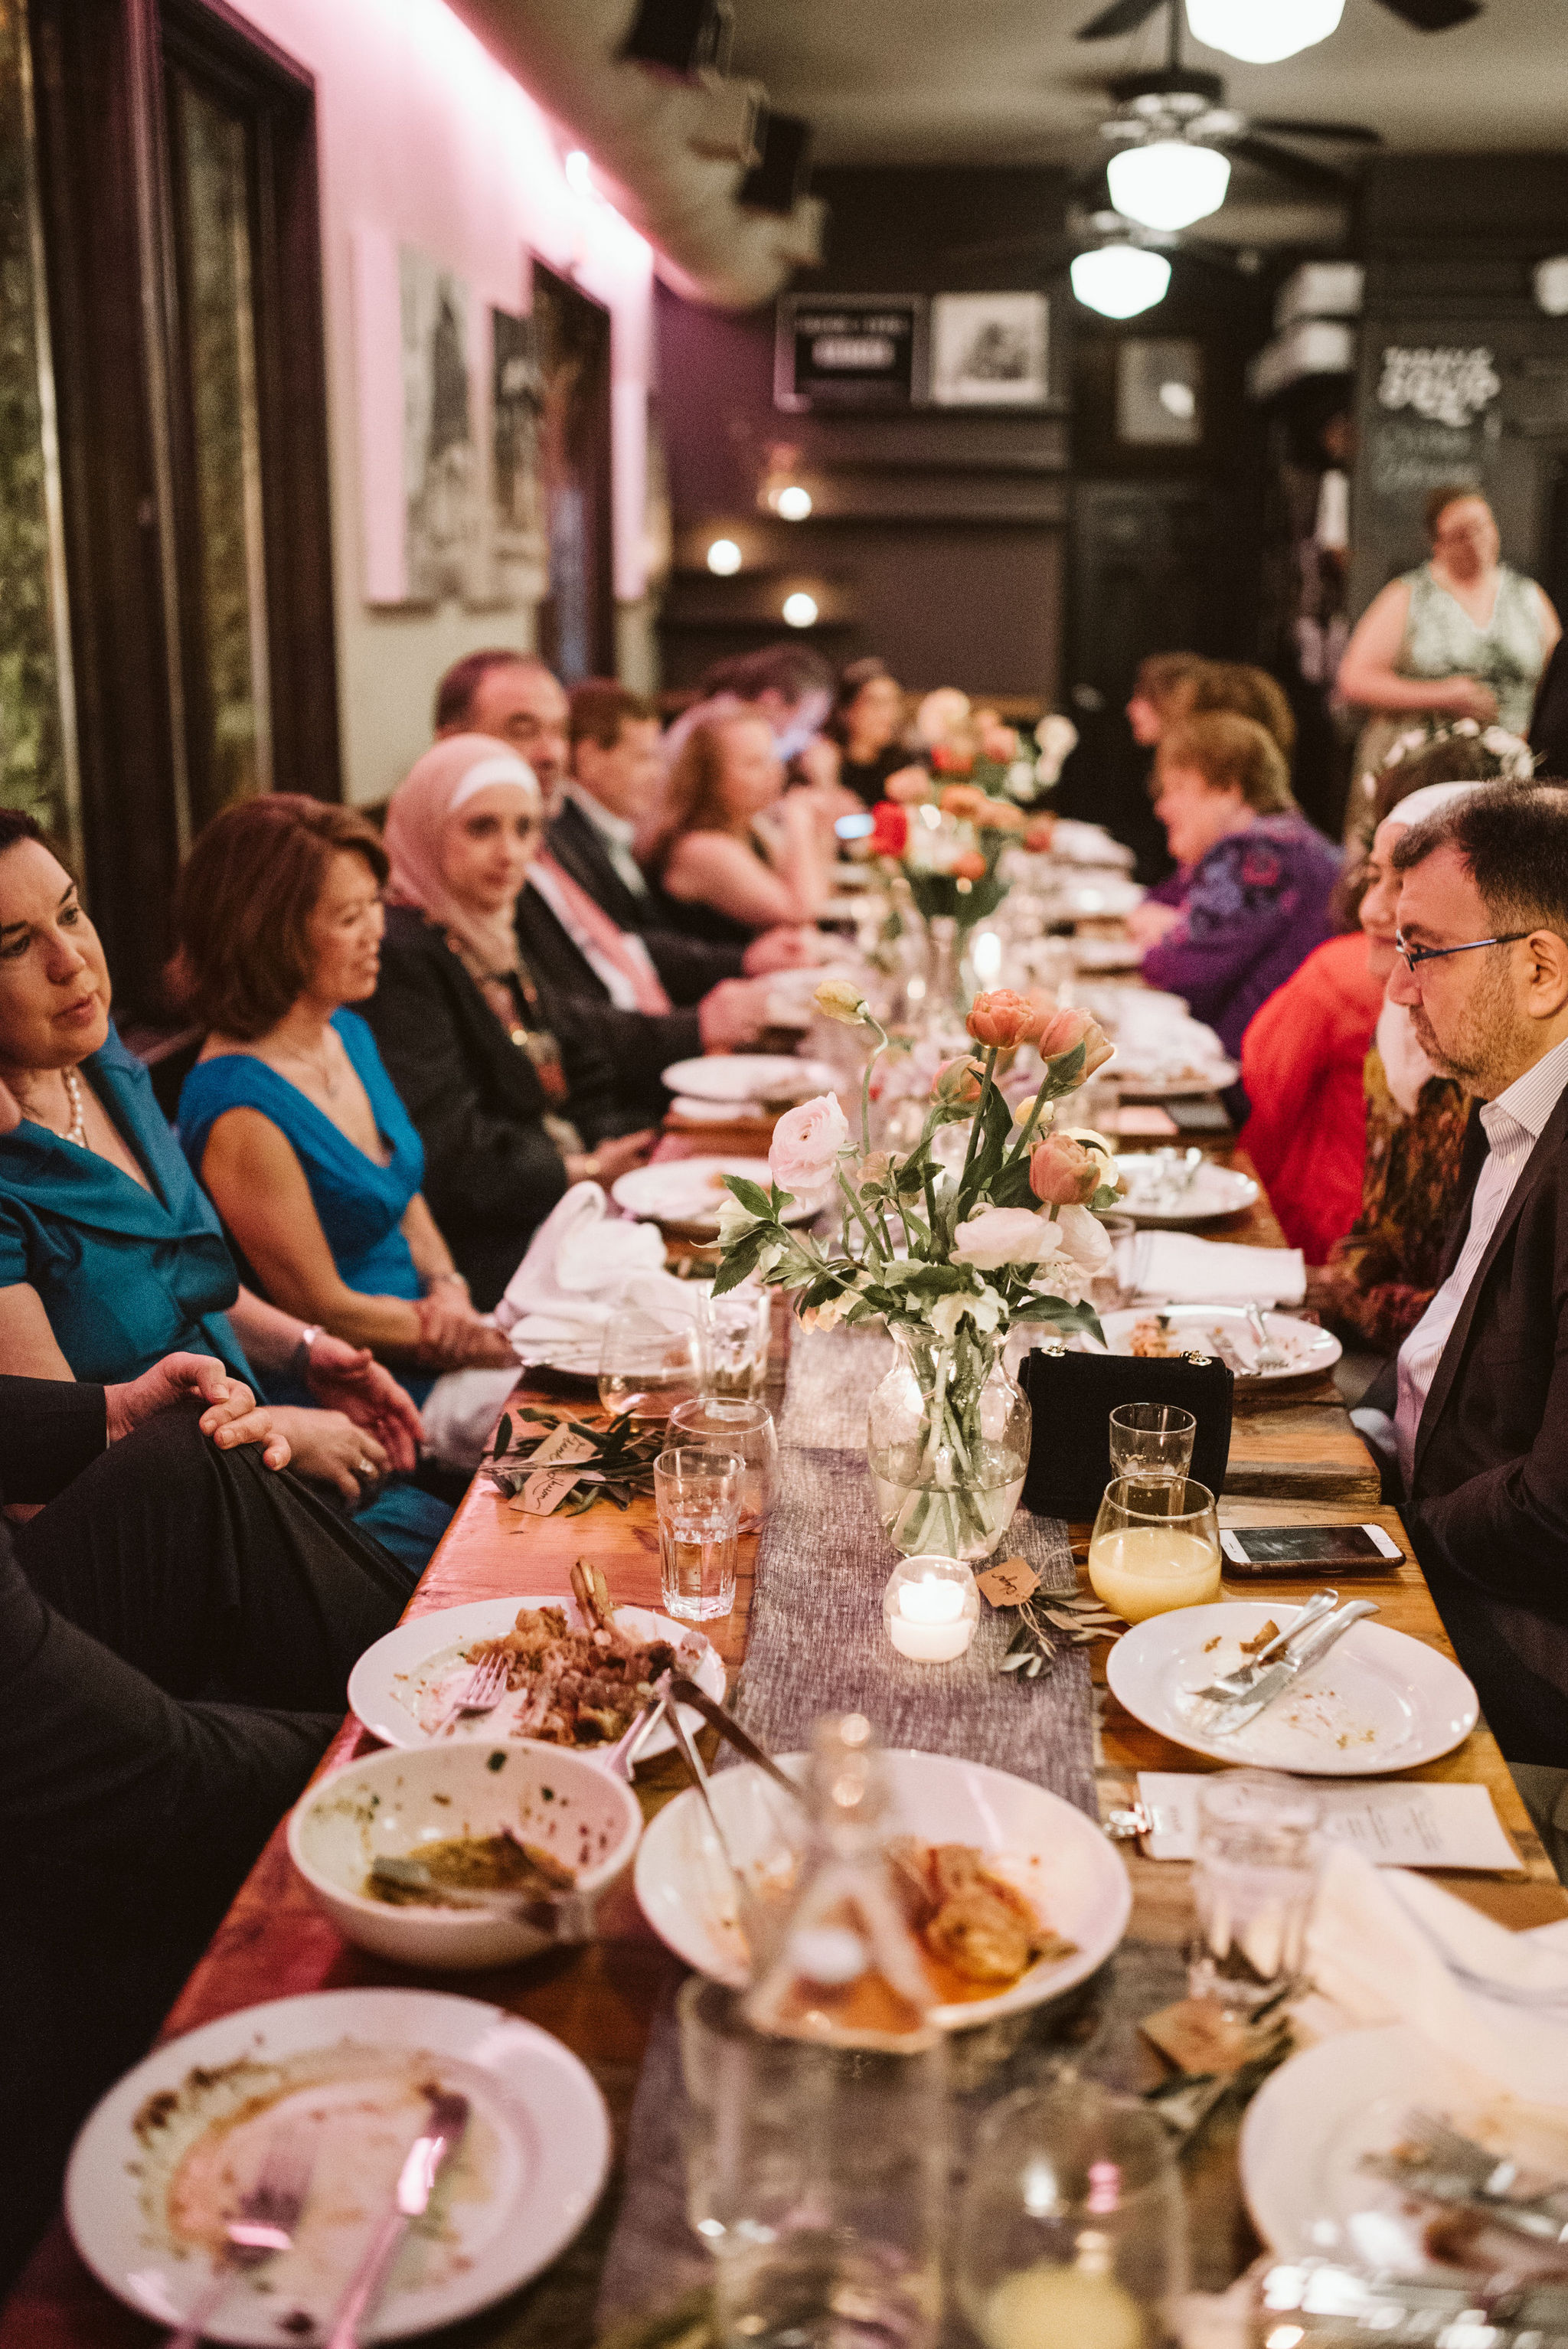  Washington DC, Baltimore Wedding Photographer, Intimate Wedding, Traditional, Classic, Big Bear Cafe, Photo of Entire Table at Reception While Guests Chat Together 